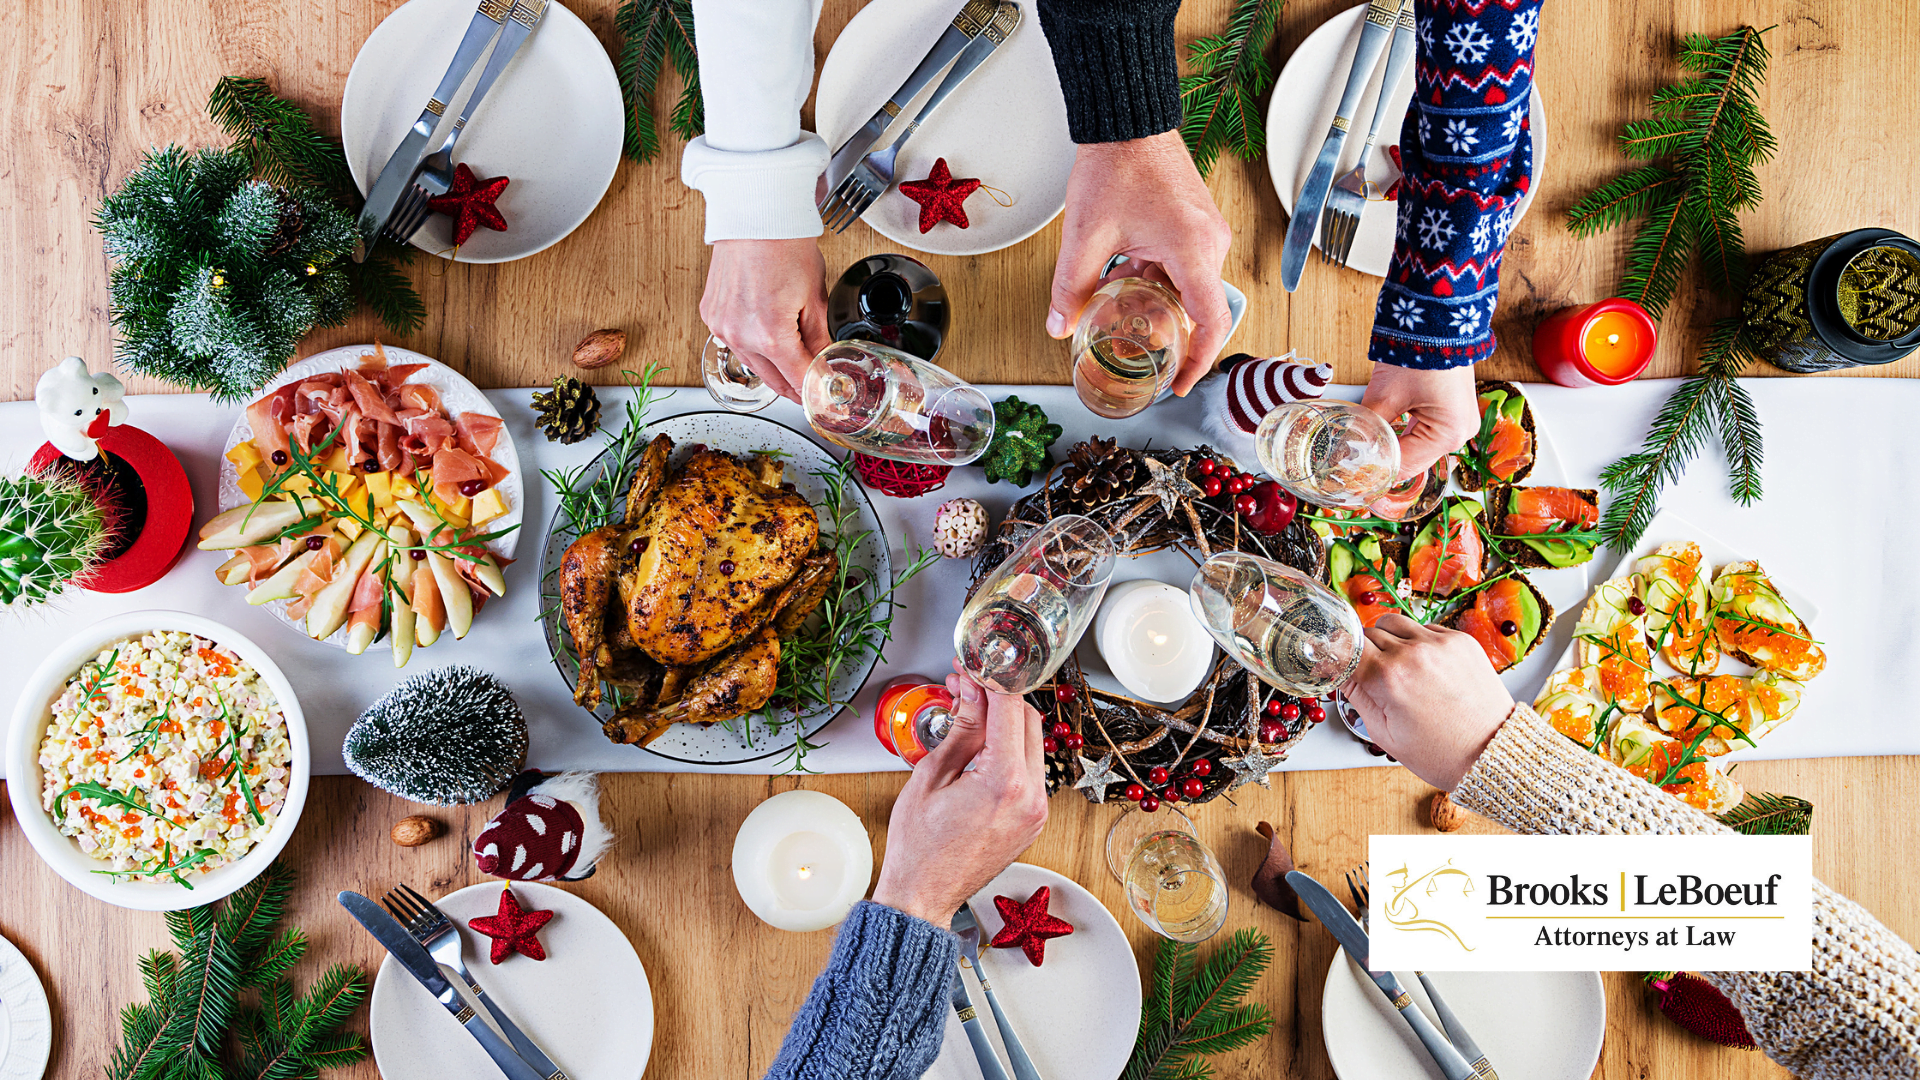 Risk and Reward: How to Protect Yourself at a Holiday Party